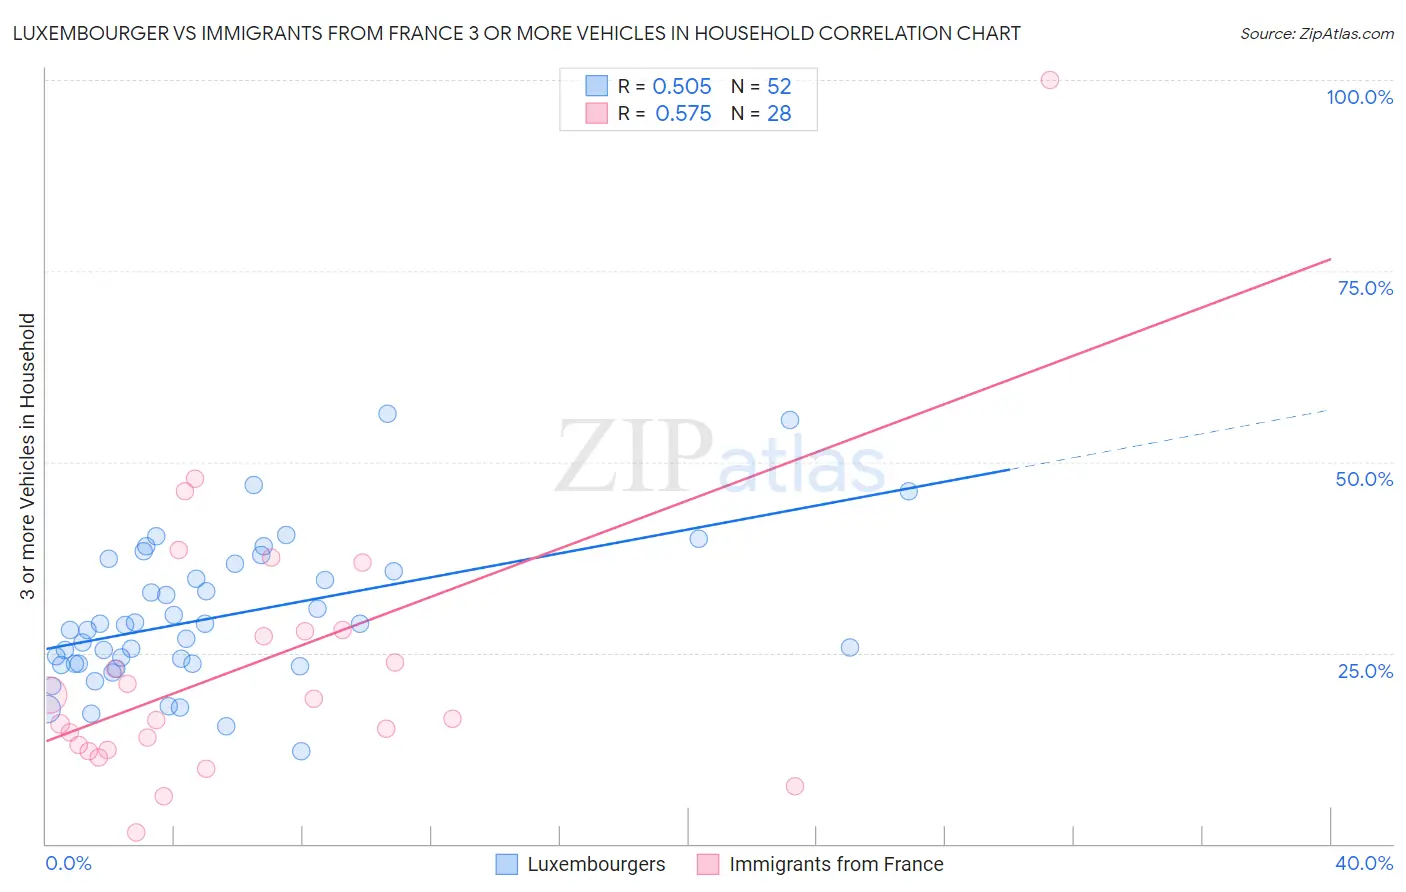 Luxembourger vs Immigrants from France 3 or more Vehicles in Household